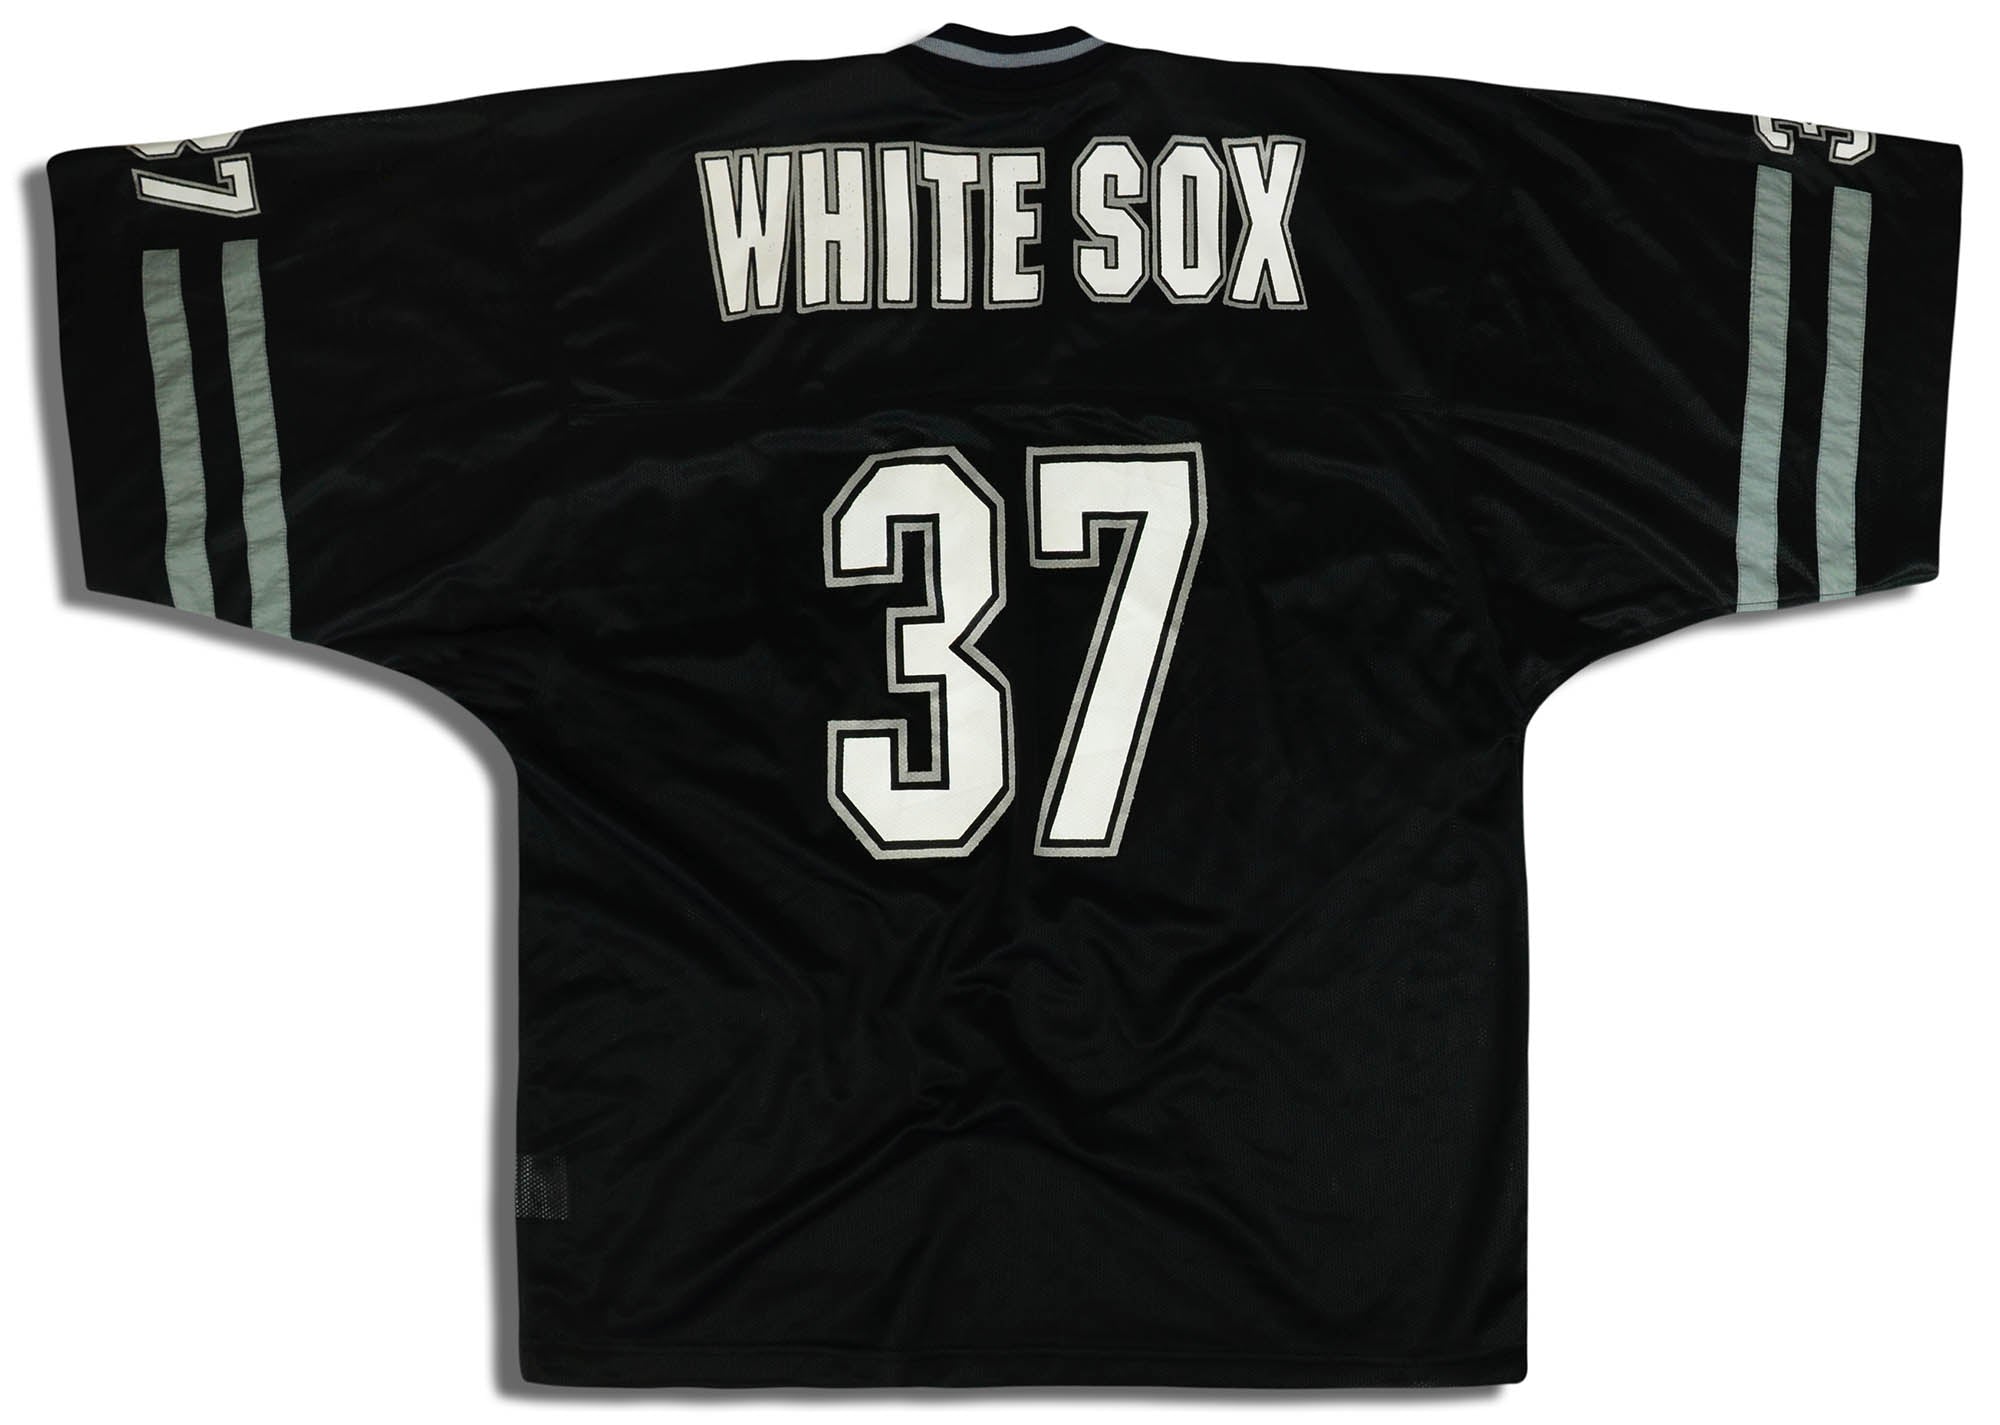 Chicago White Sox on X: Got the W. ✓  / X